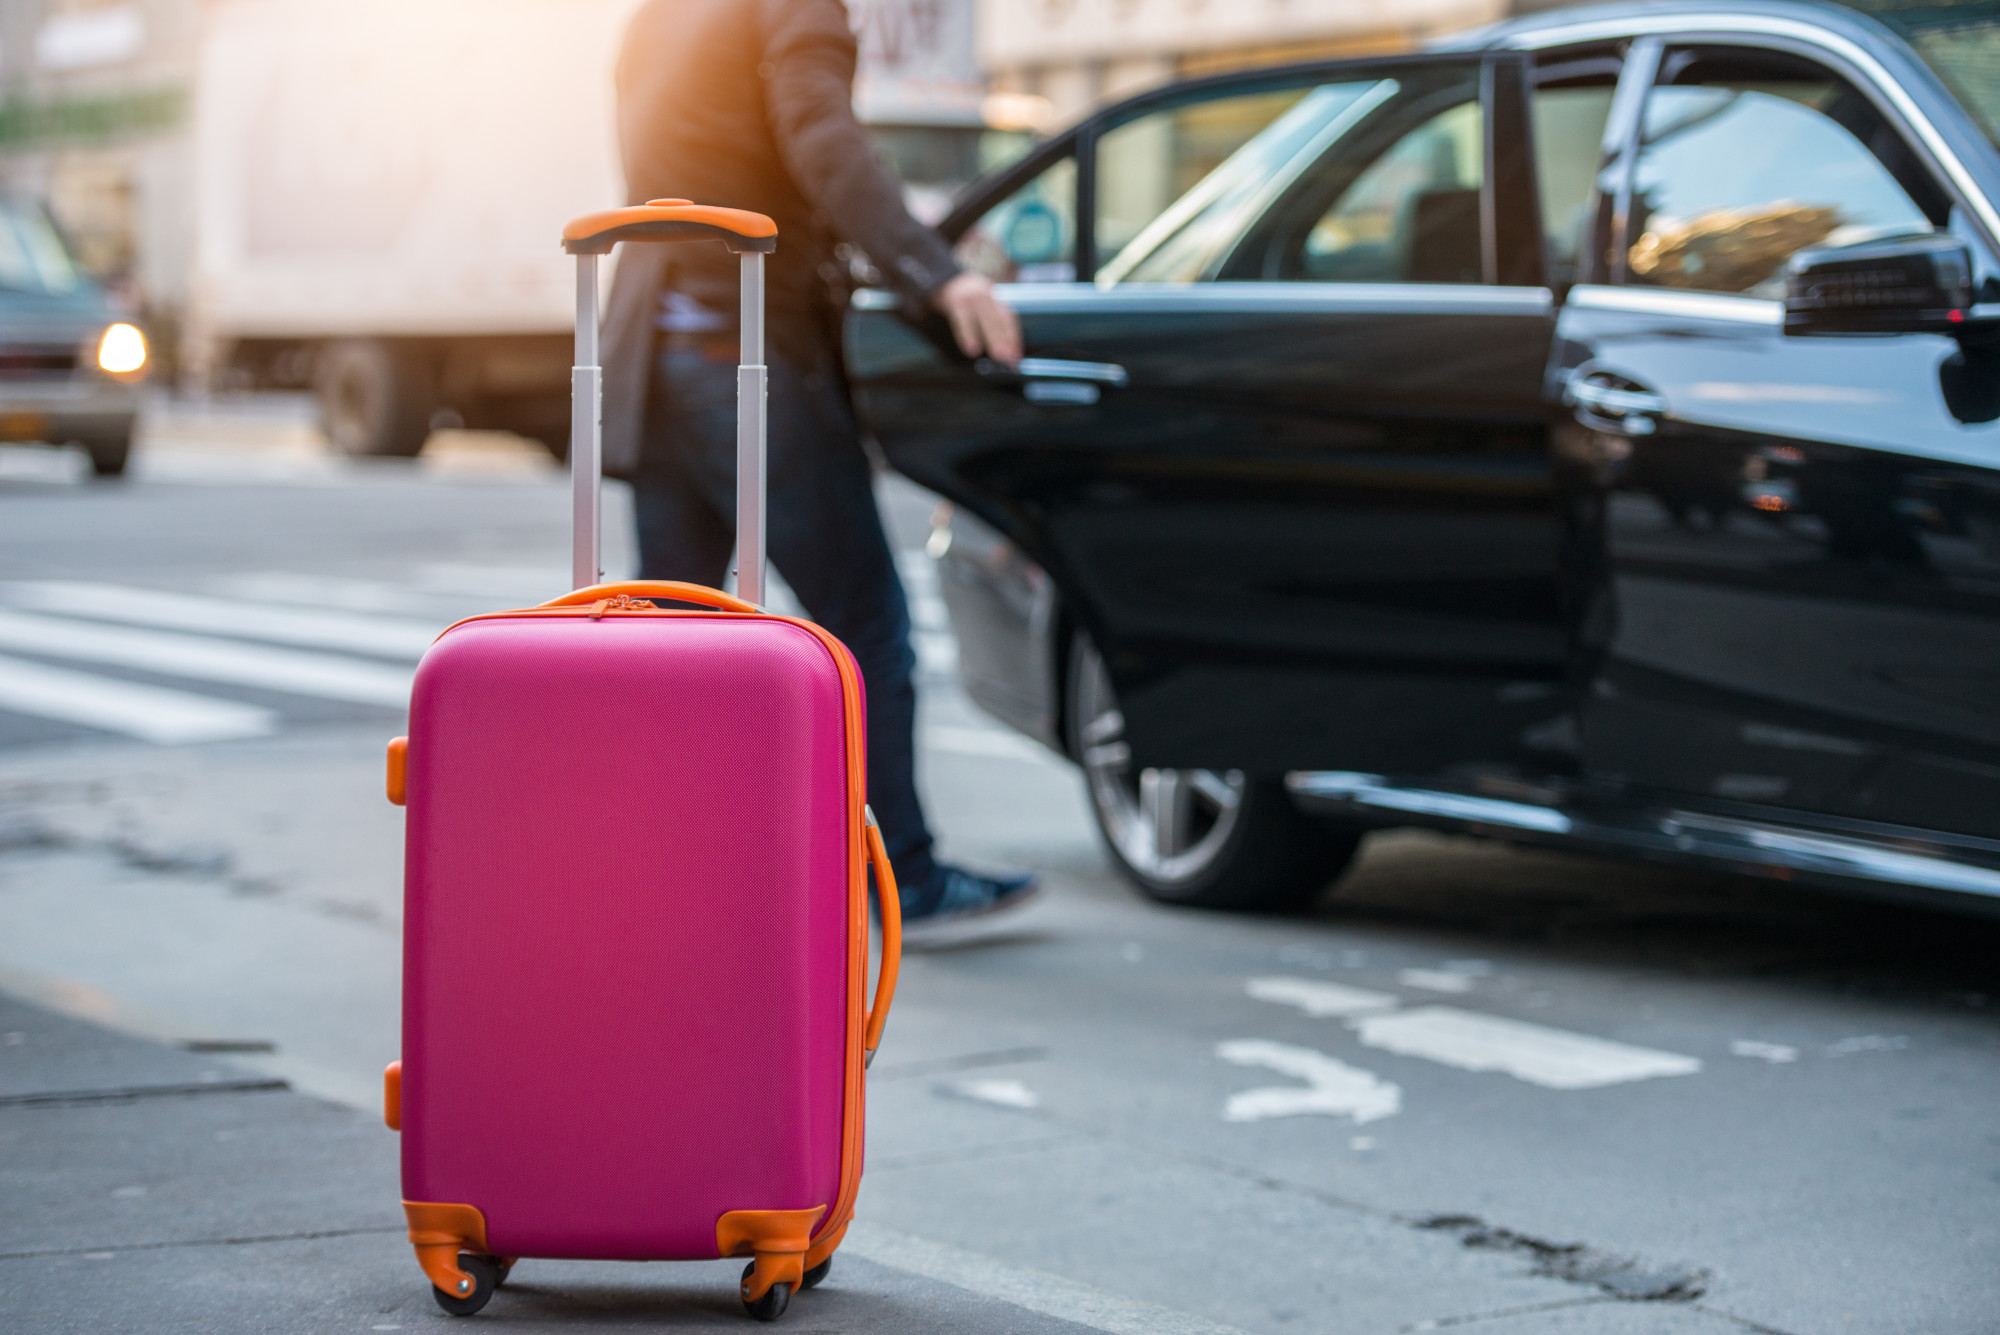 8 Reasons You Should Hire an Airport Chauffeur